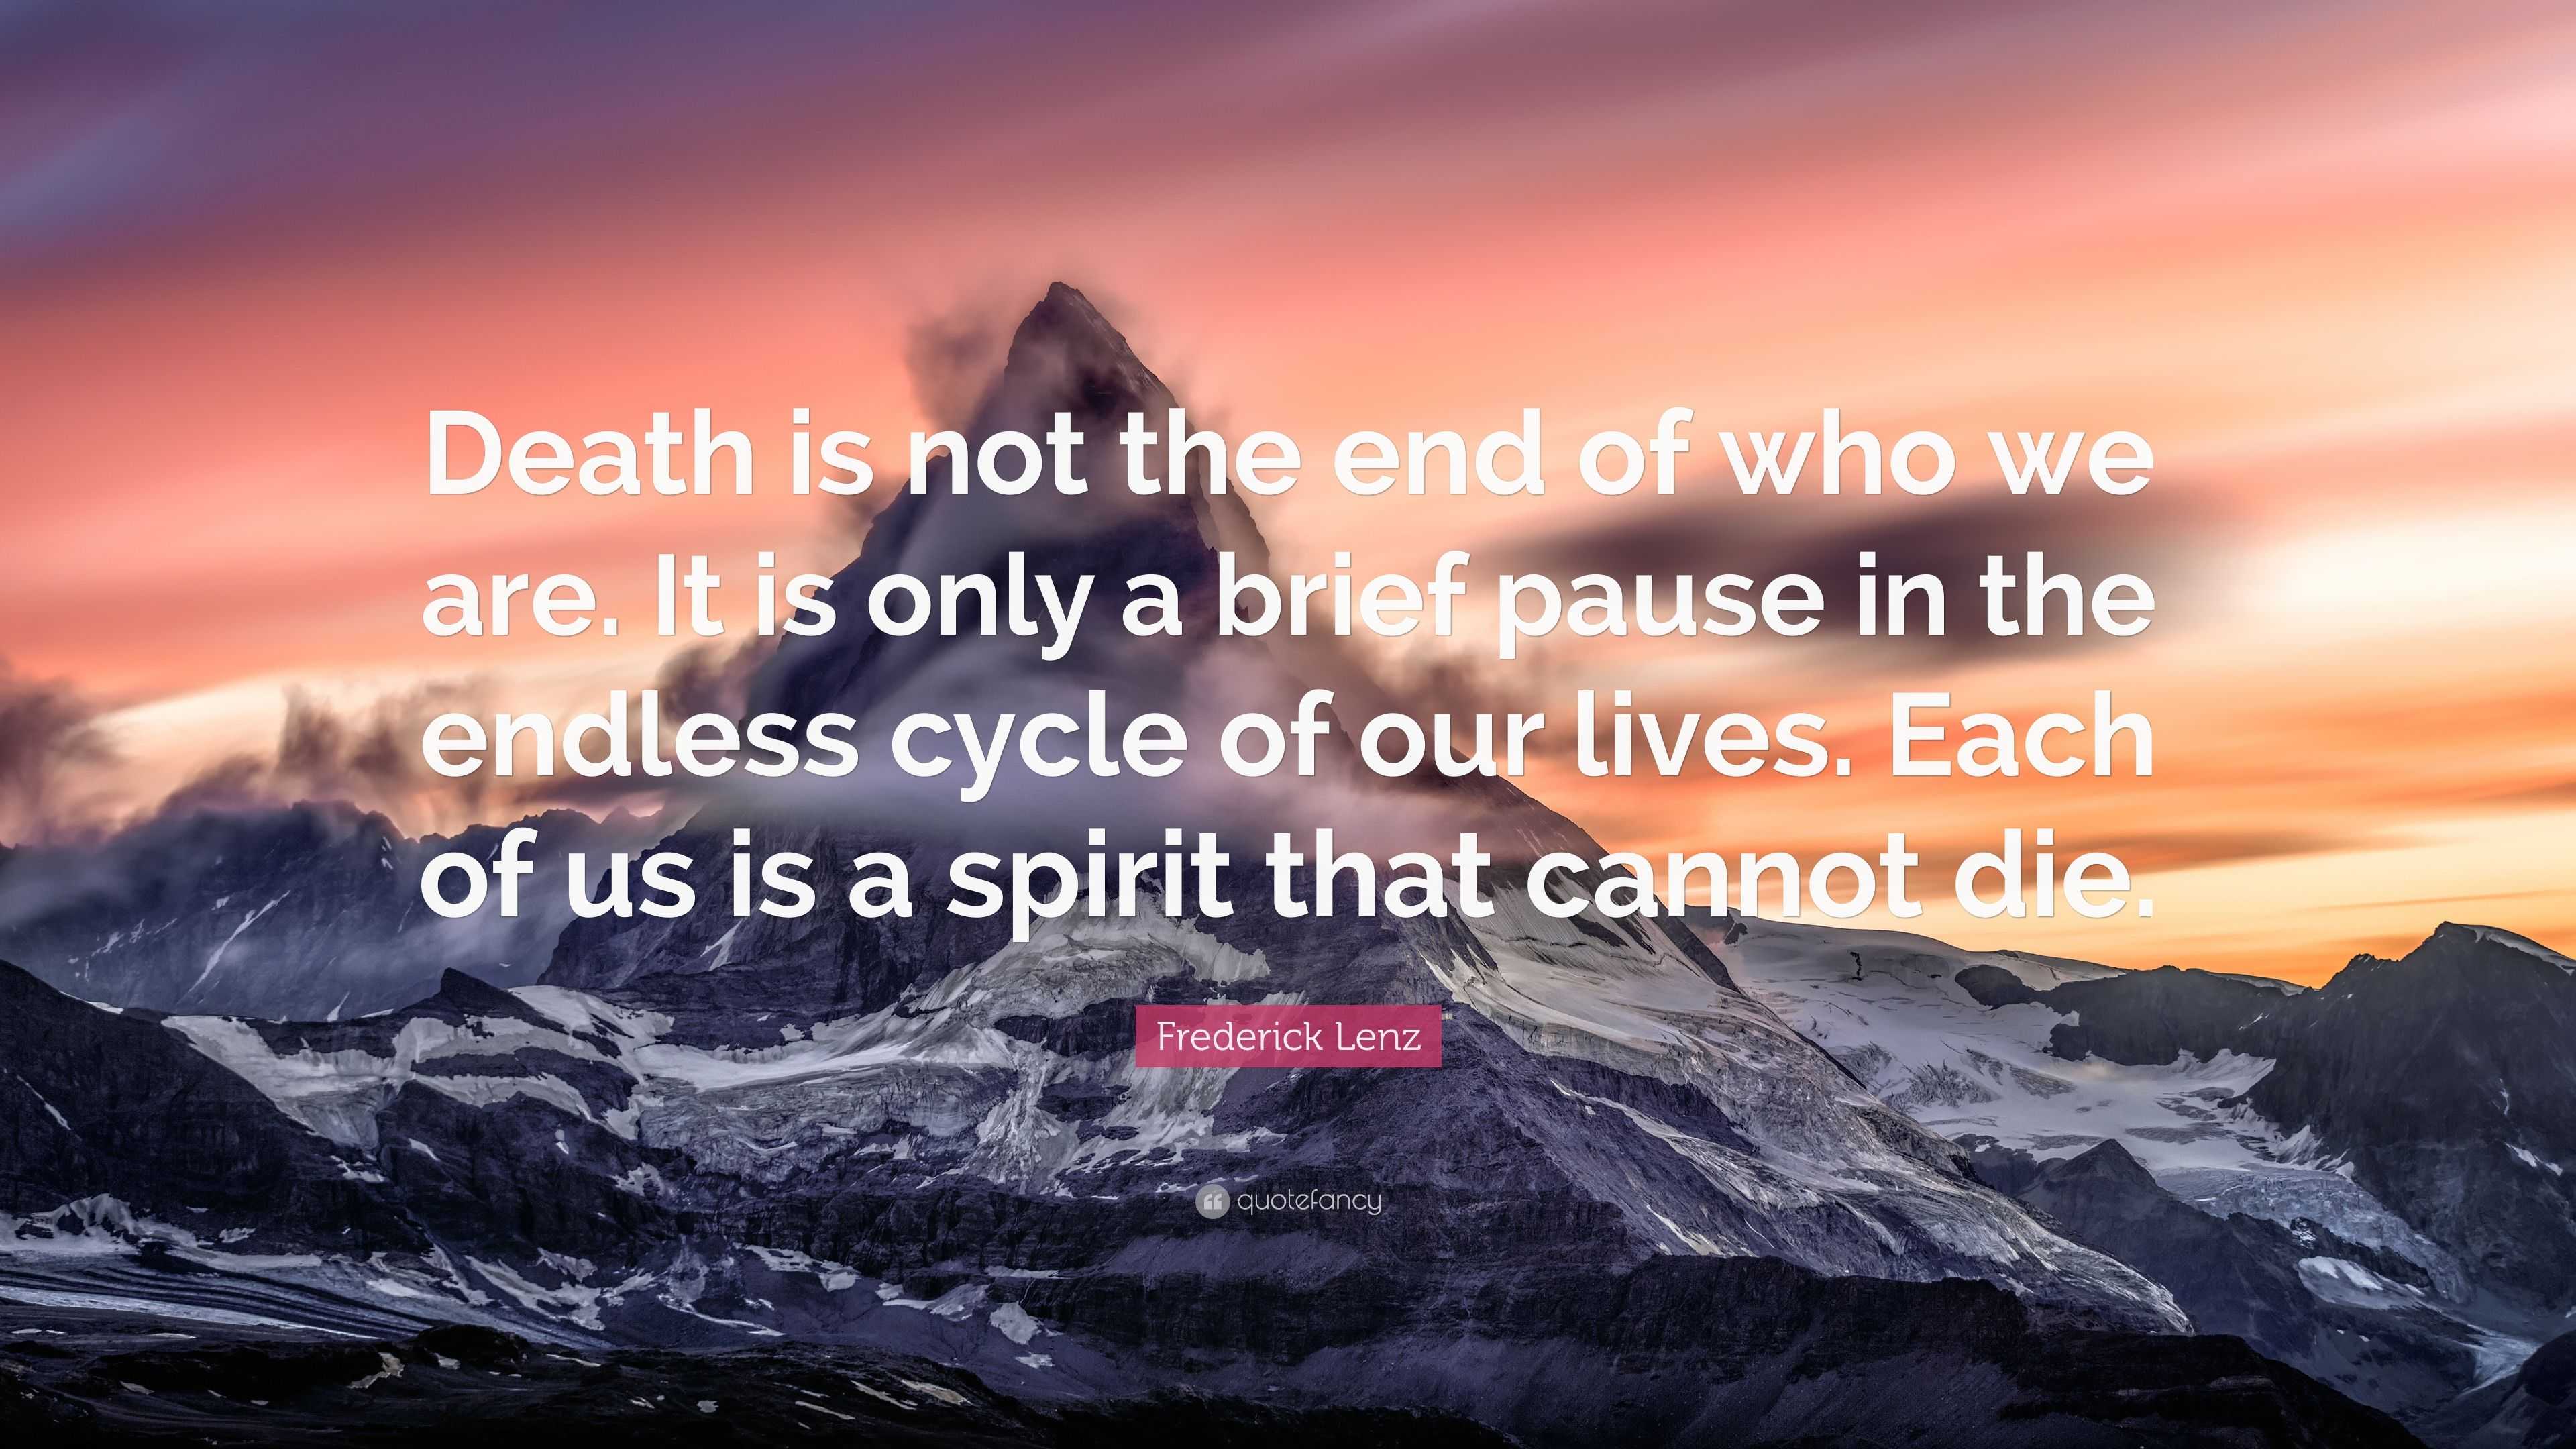 Frederick Lenz Quote: “Death is not the end of who we are. It is only a ...